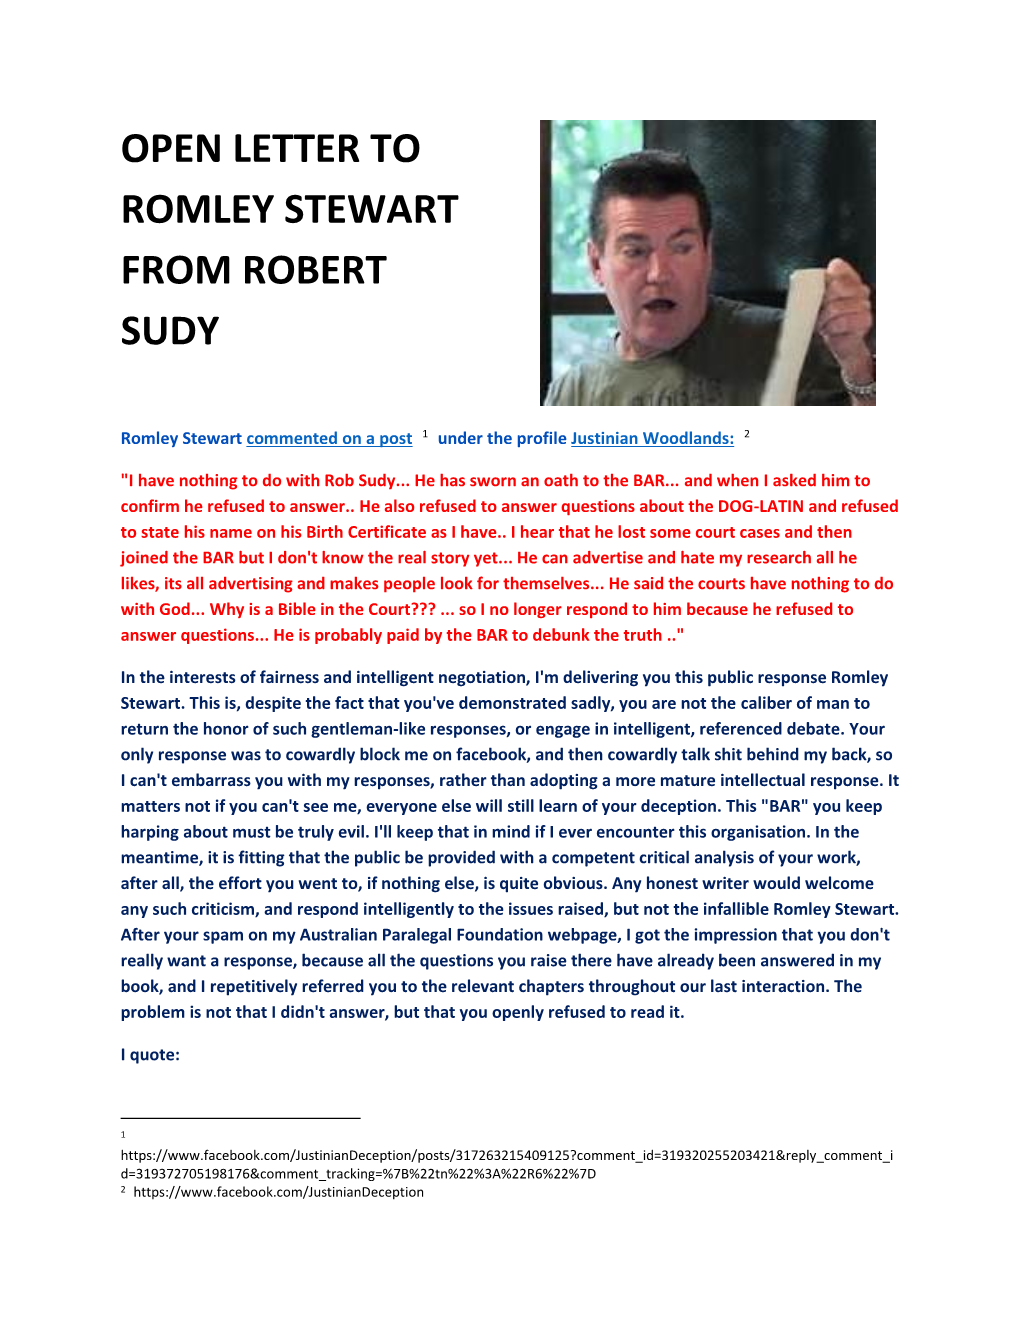 Open Letter to Romley Stewart from Robert Sudy